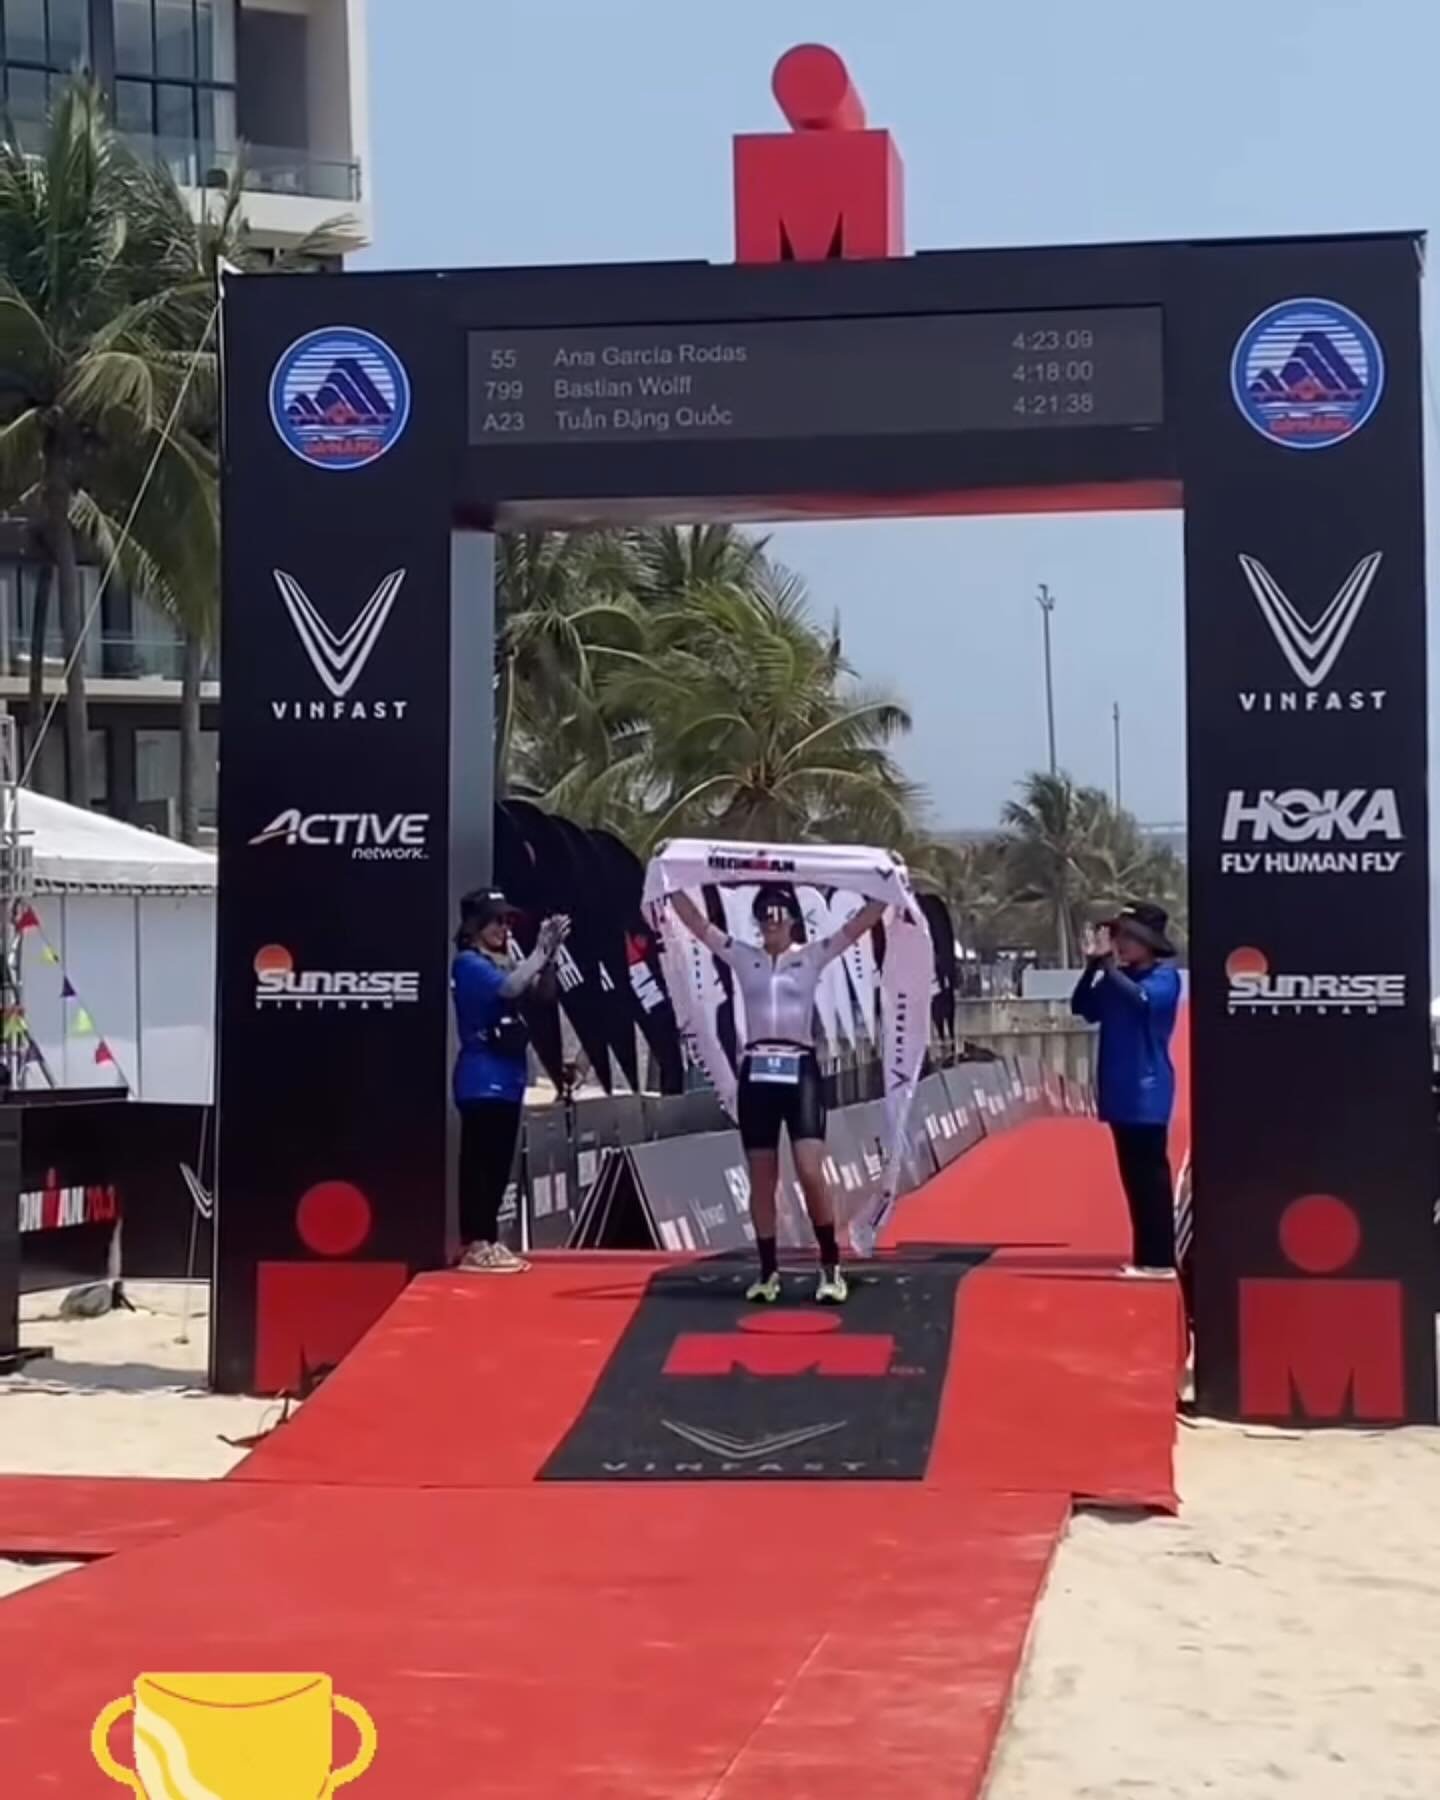 A Z K 

Lai @isagar94 takes on the overall 🏆, age group 🥇 and fastest 🚲🏆at @ironman70.3vietnam . With a reduced swim from 1800 to 1200 and a total time of 4:23. 

We never talk about times or placing or winning , we talk about giving the absolute